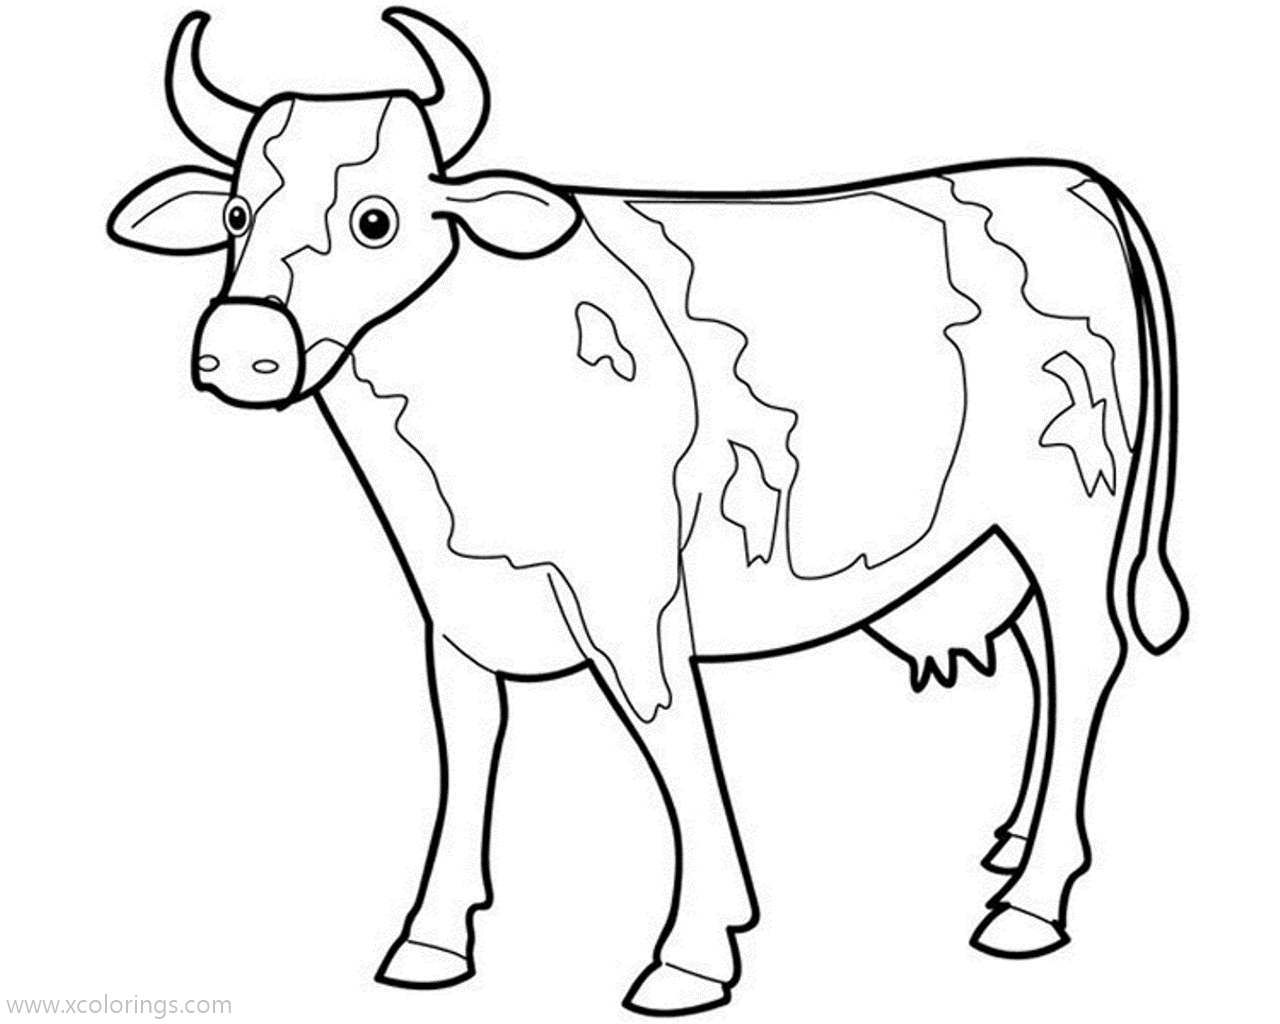 Free Holstein Animal Cow Coloring Pages printable